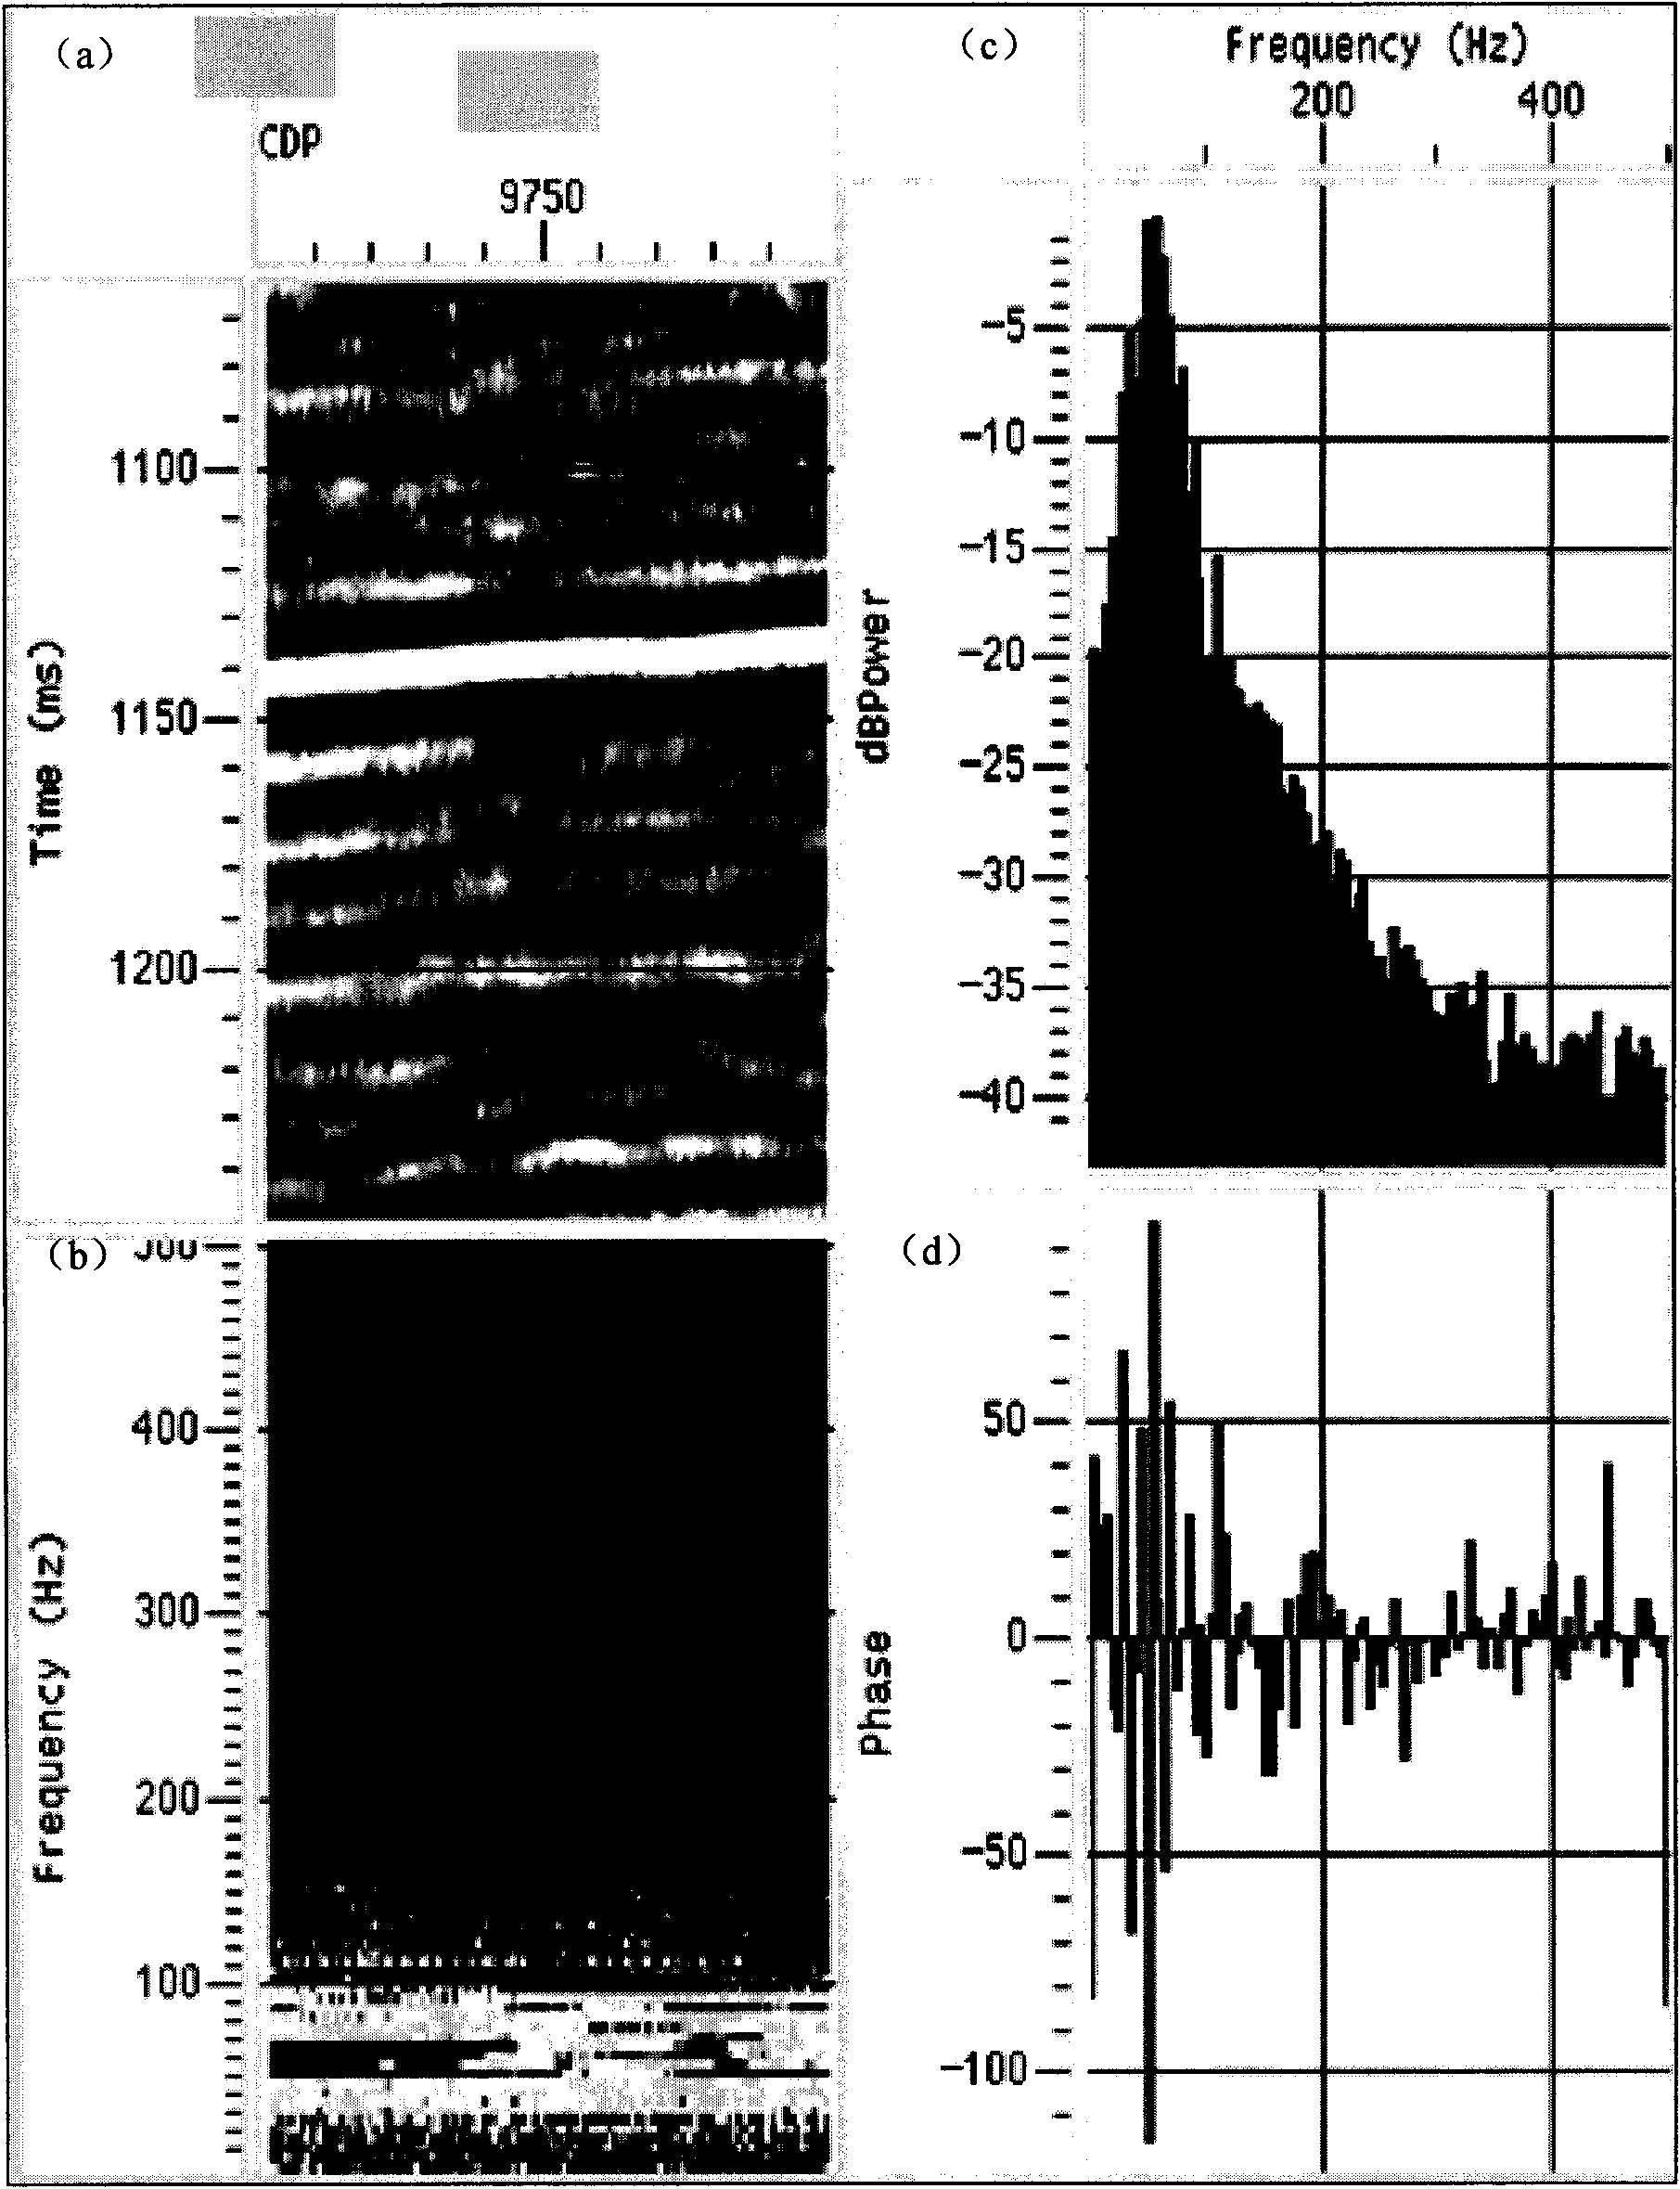 Method for processing seismic data by using high-precision single-channel spectrum analysis technology